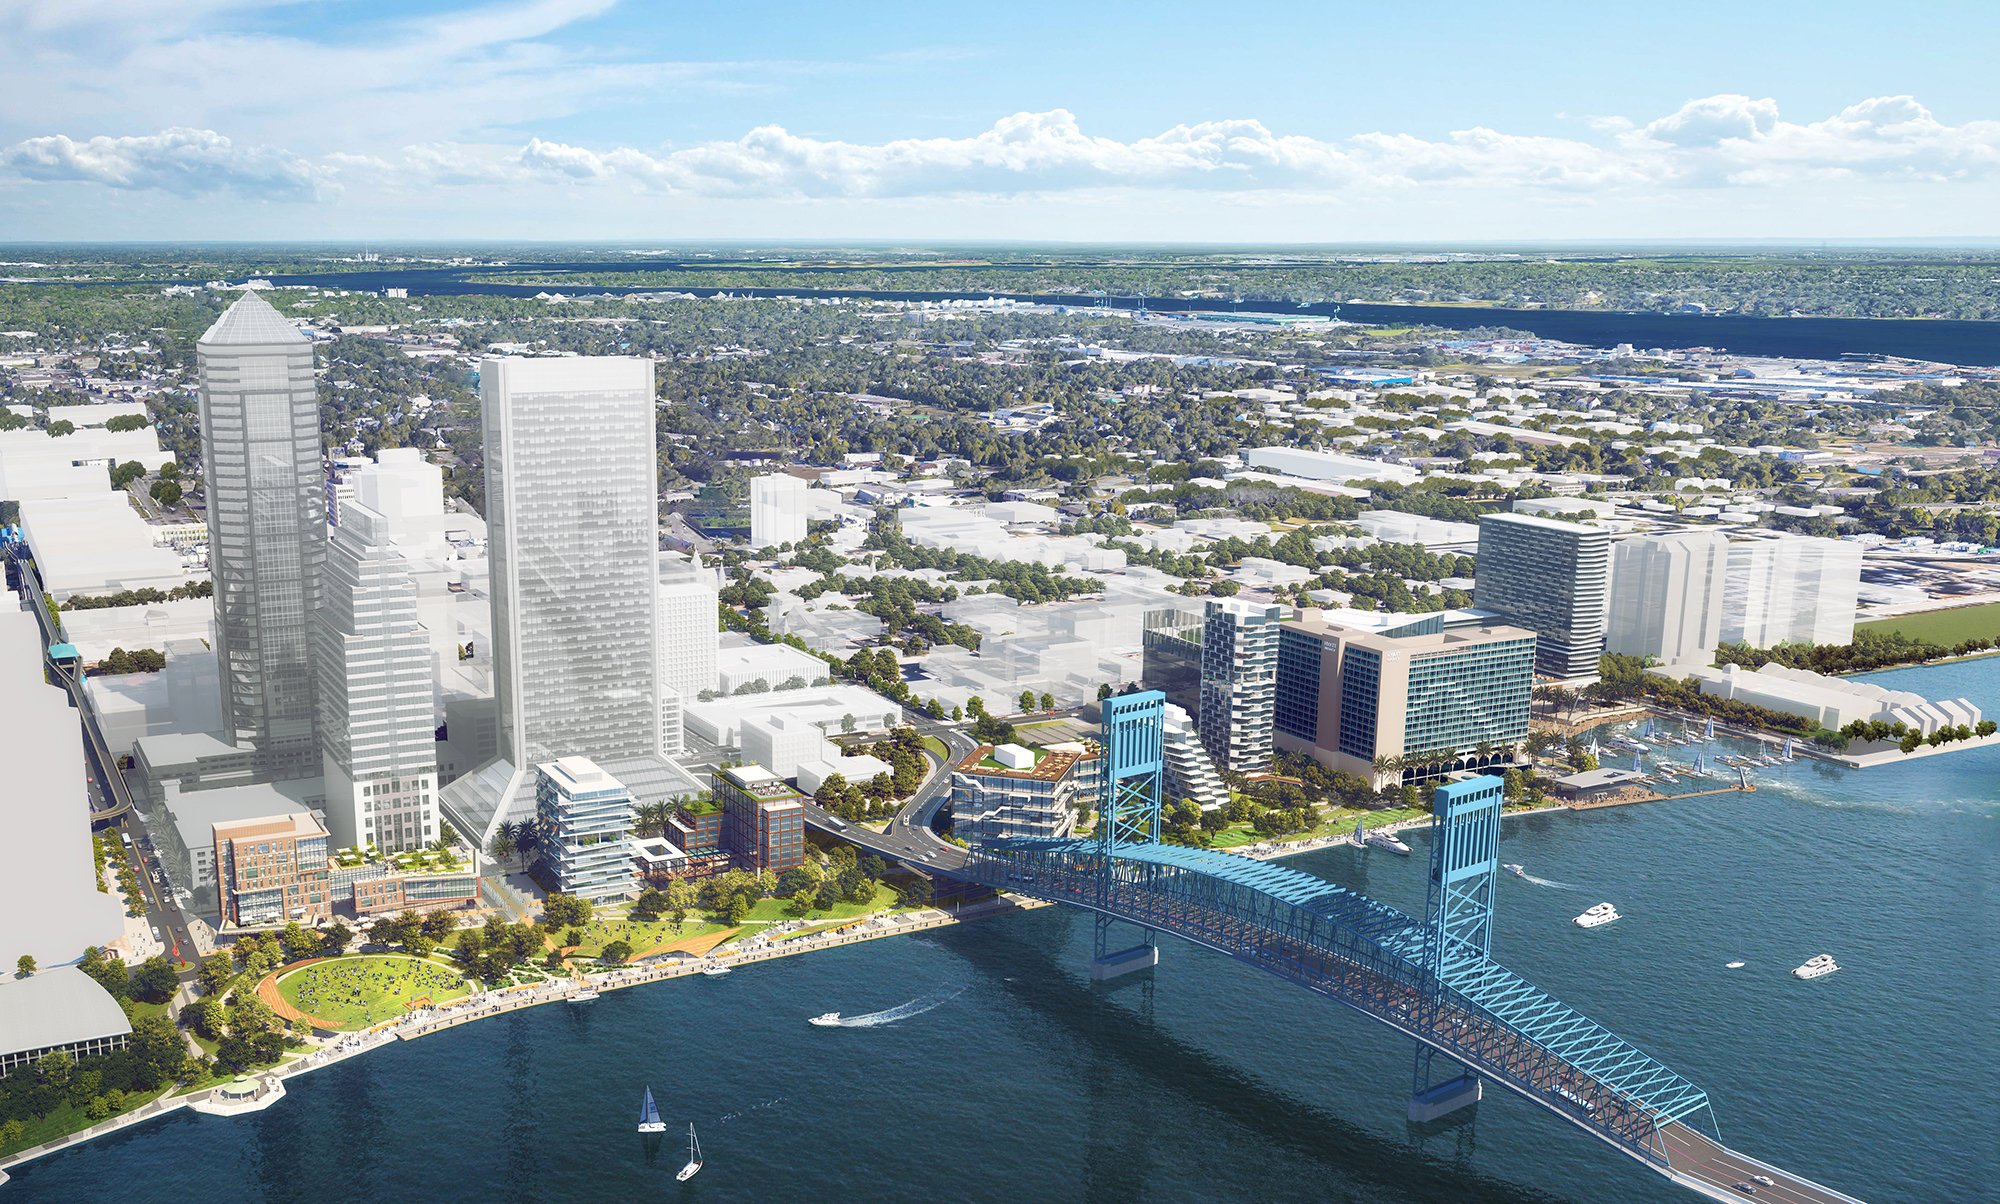 The $2 billion project would stretch from the former Jacksonville Landing to near TIAA Bank Field.